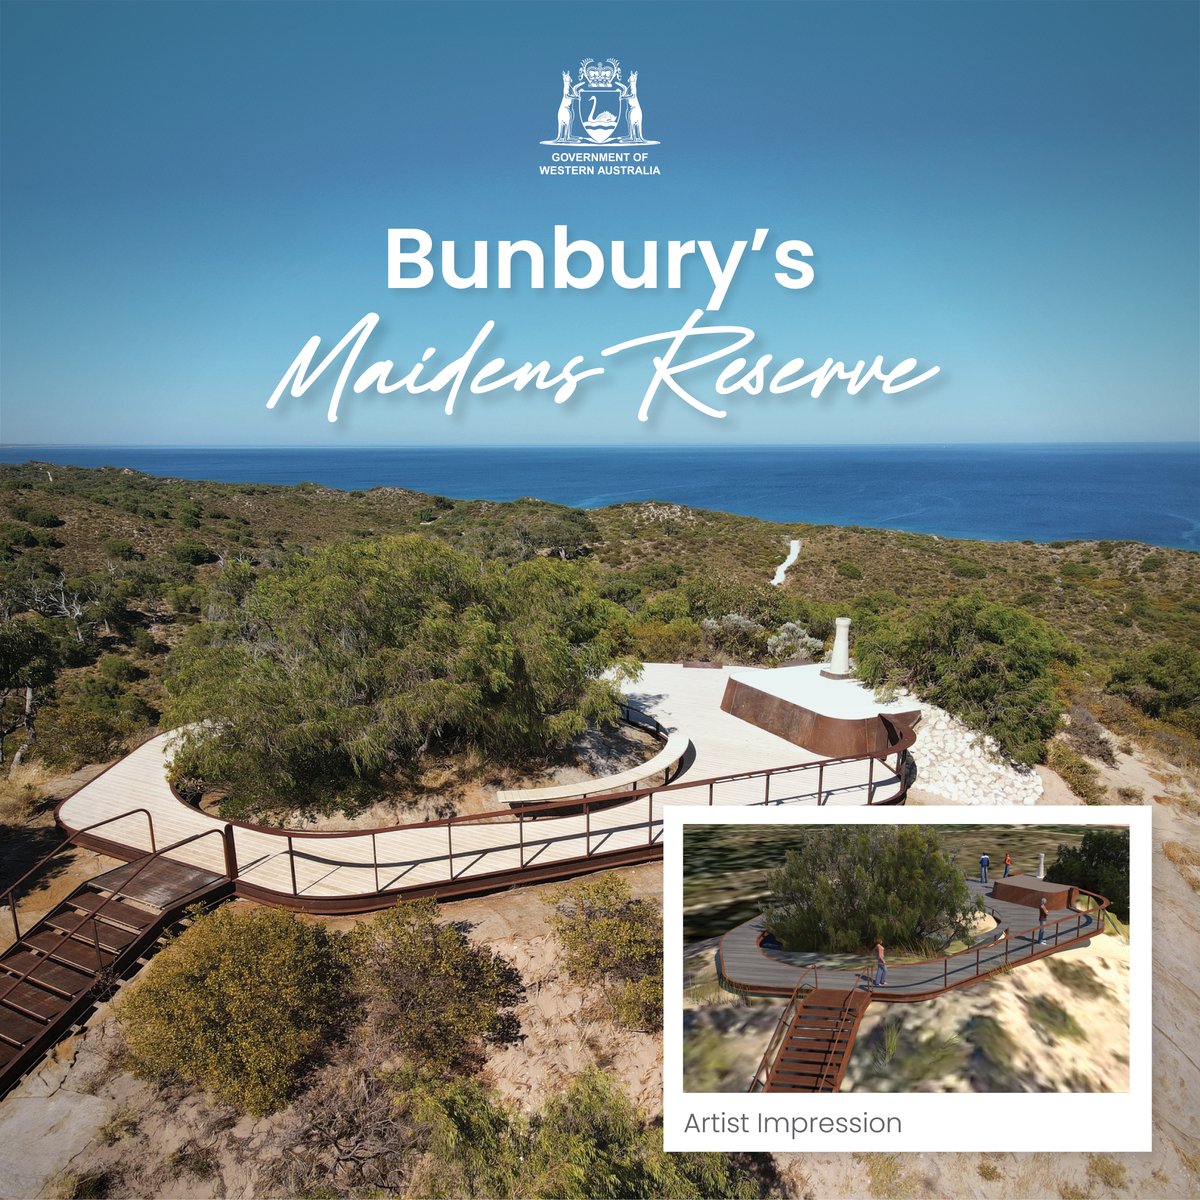 Bunbury's Maidens Reserve has undergone a remarkable transformation with two new lookouts providing panoramic views of Kalgulup Regional Park, the ocean and the wider City of Bunbury. Check it out for yourself next time you're there! 🤩